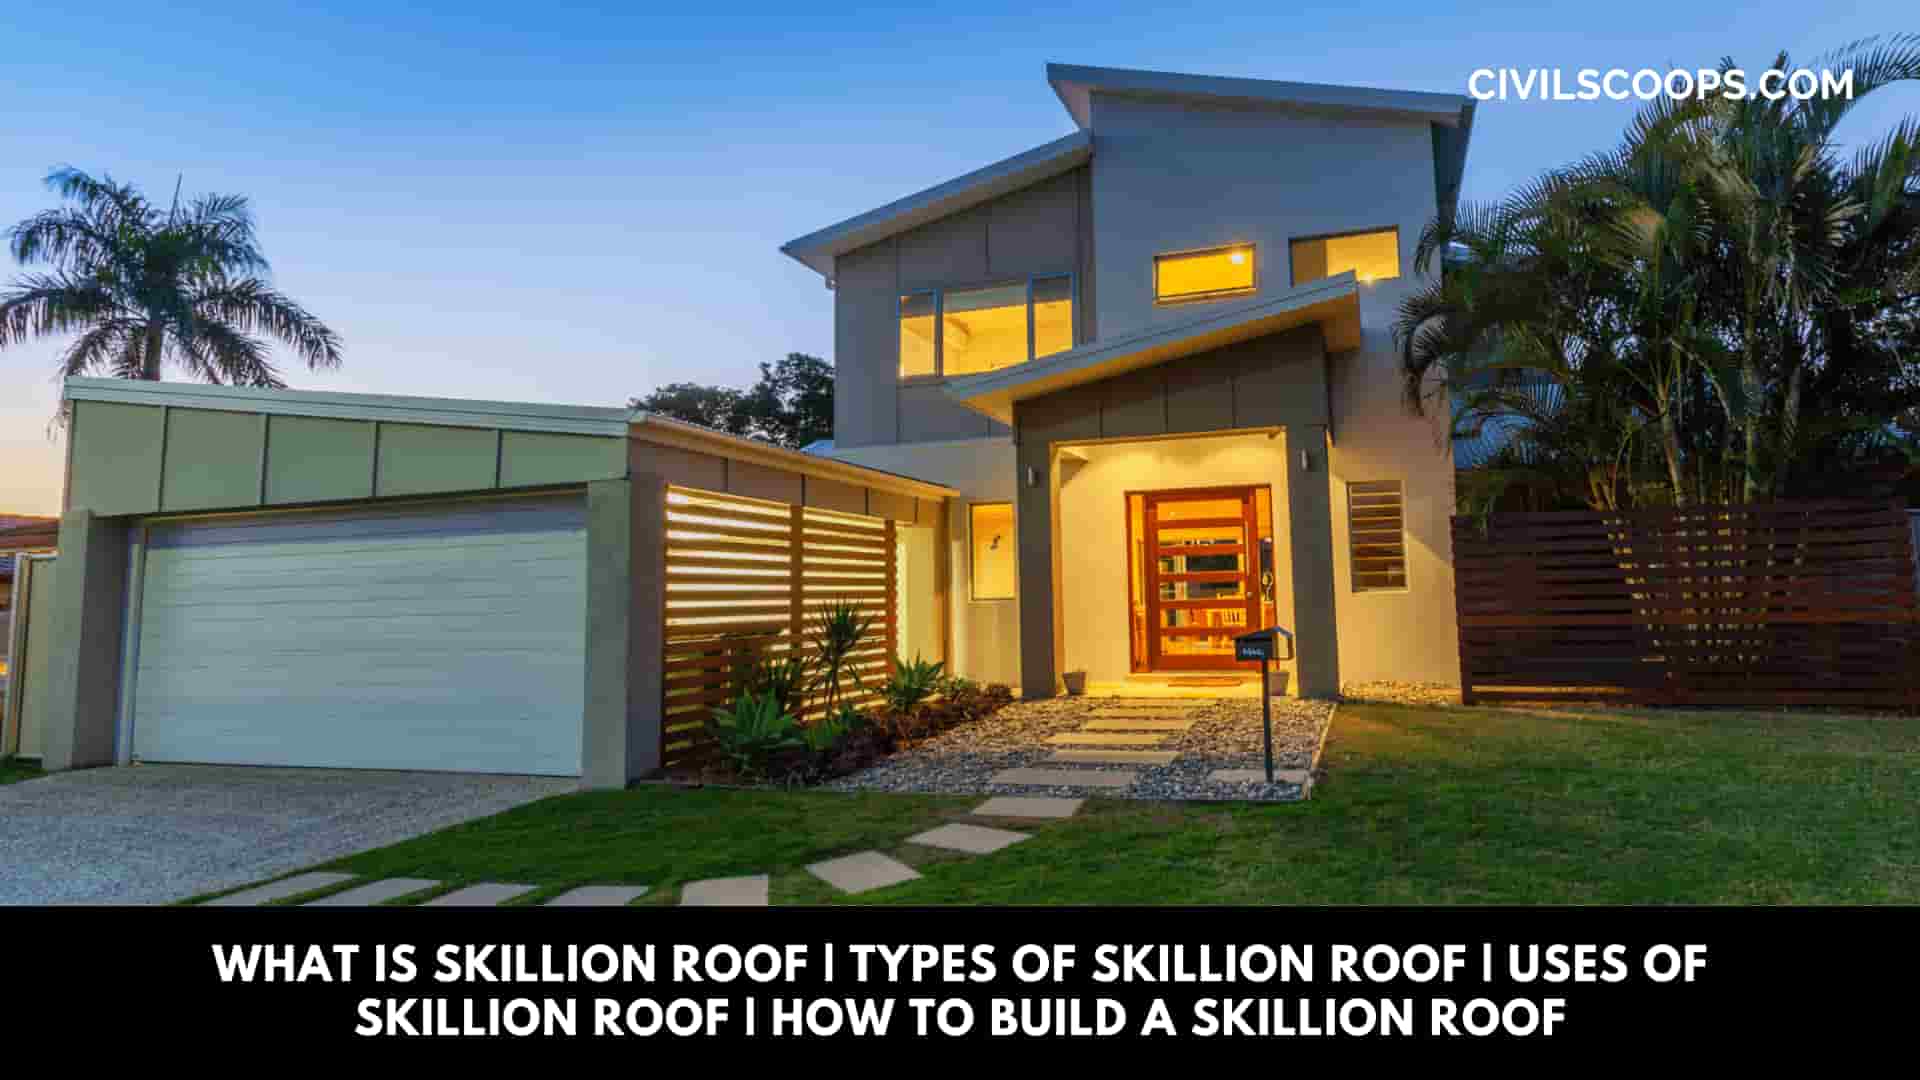 What Is Skillion Roof Types of Skillion Roof Uses of Skillion Roof How to Build a Skillion Roof